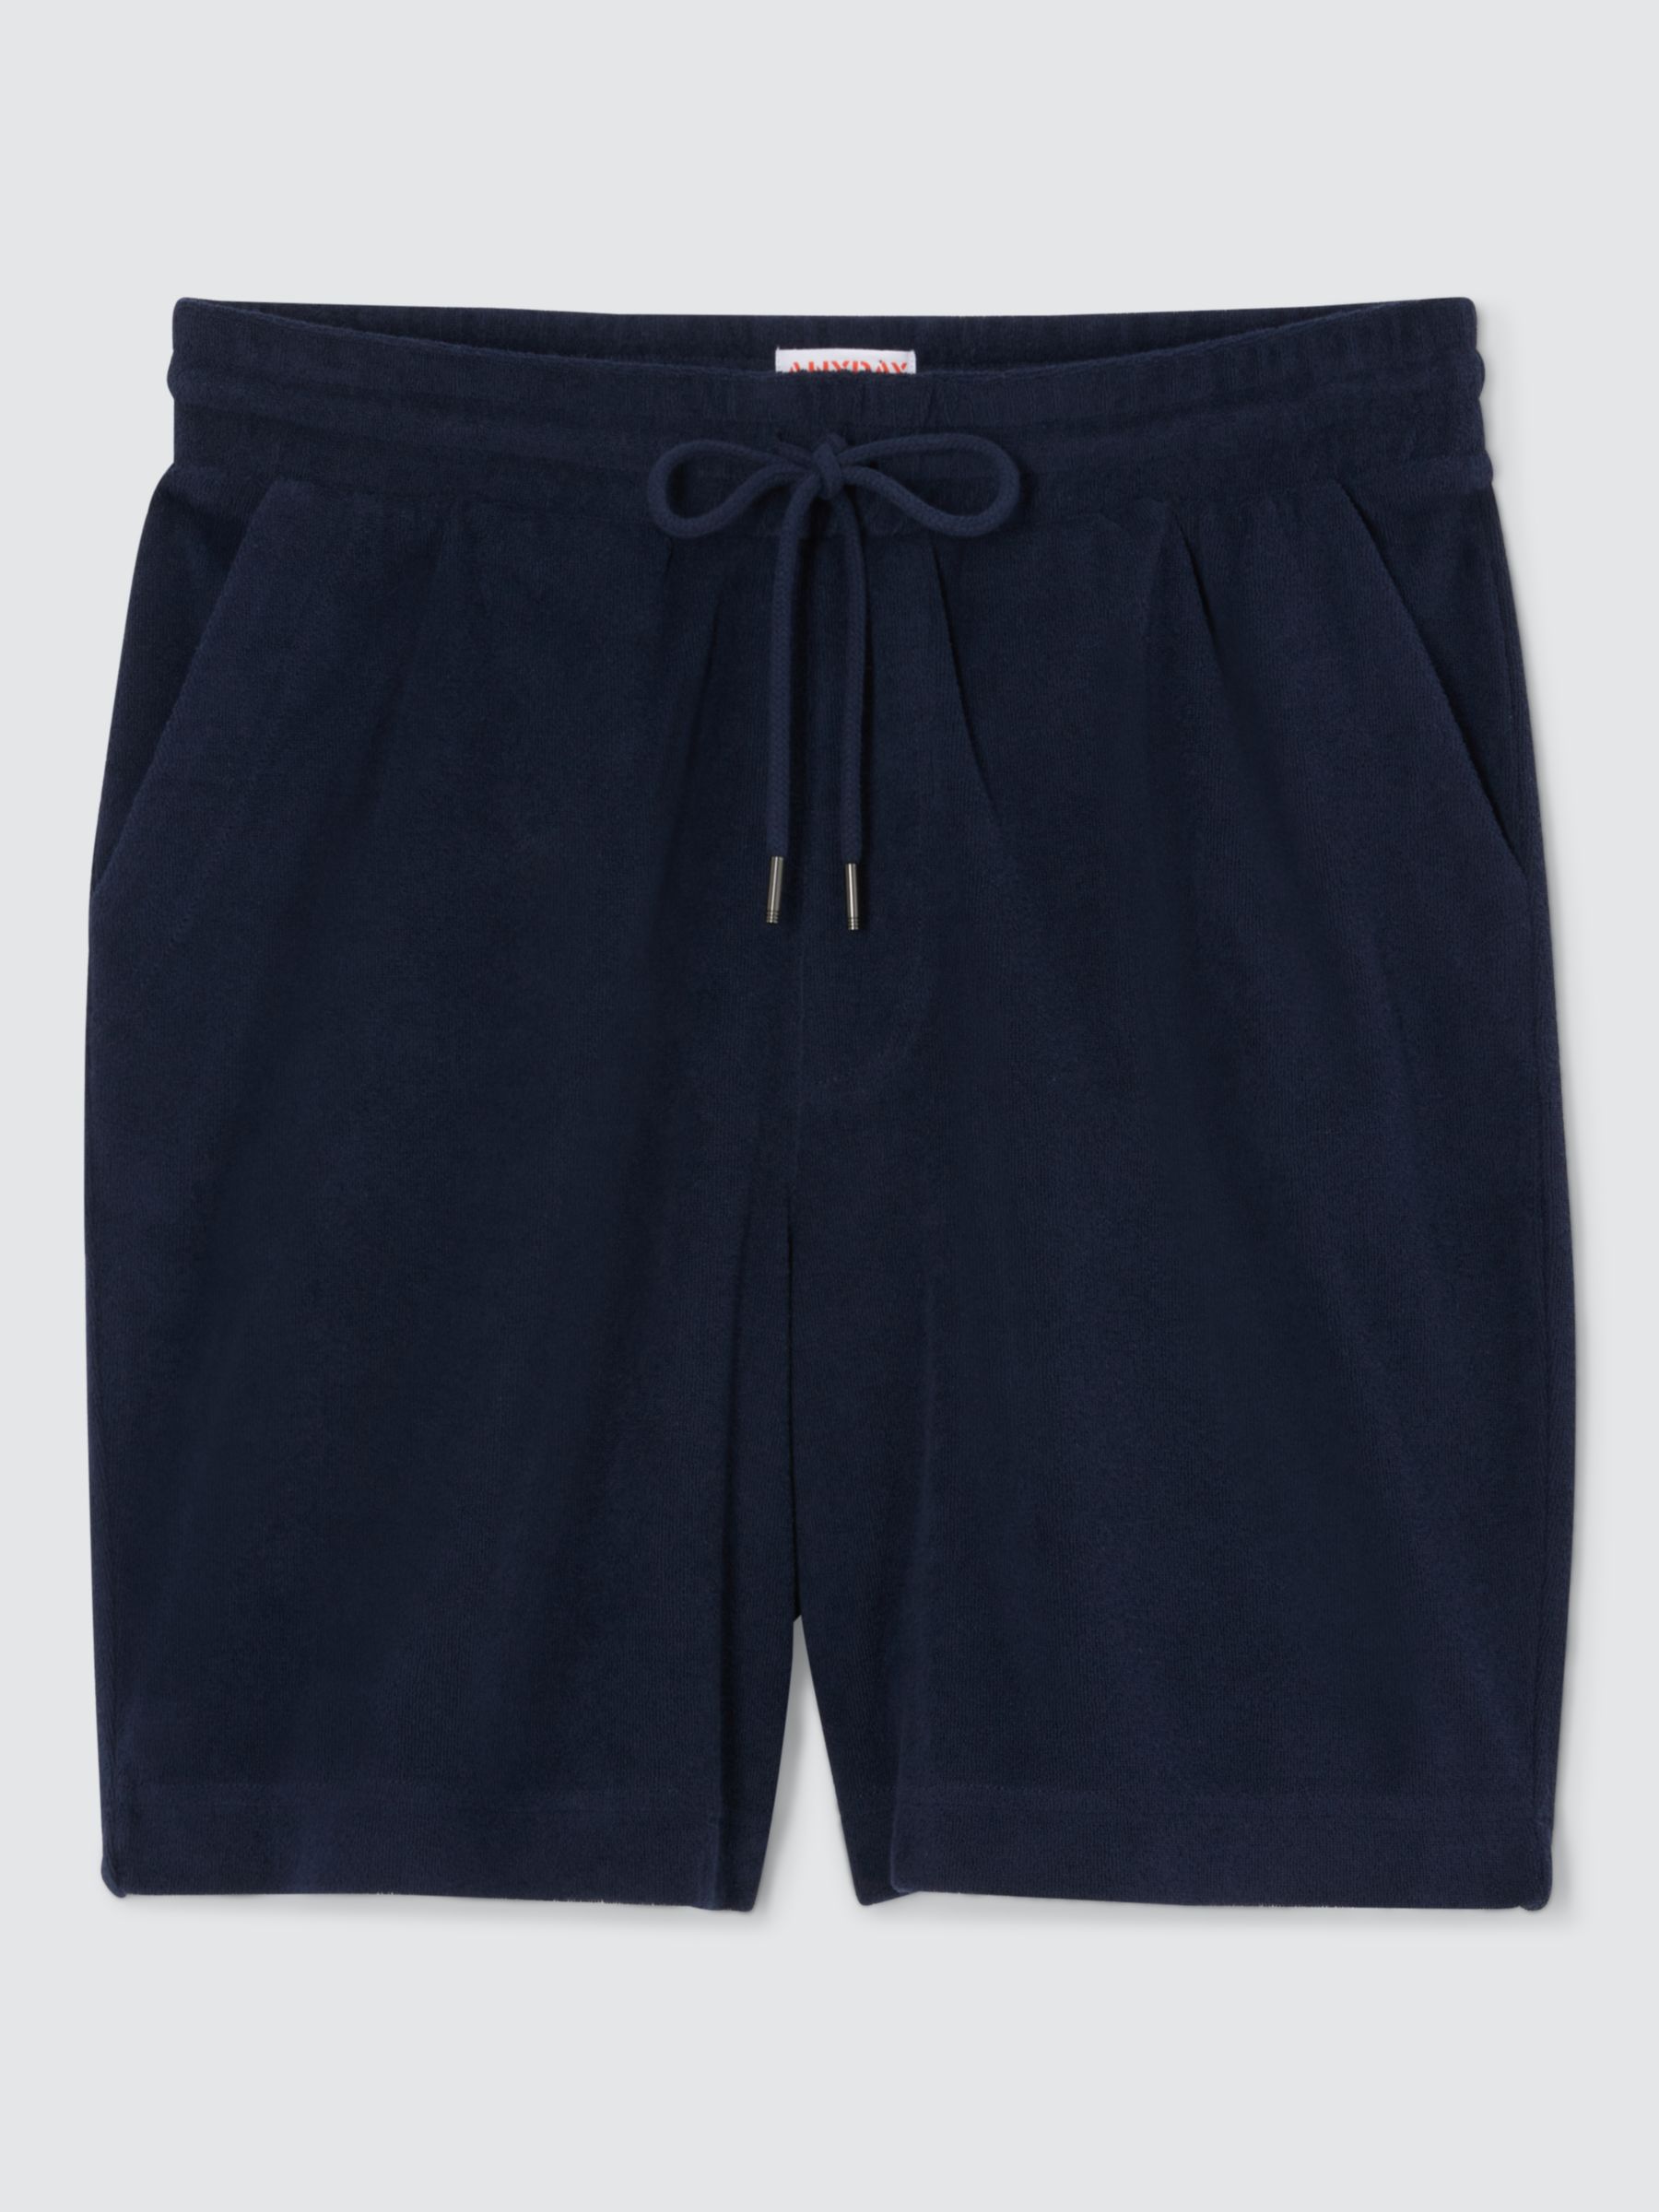 John Lewis ANYDAY Towelling Shorts, Navy, M